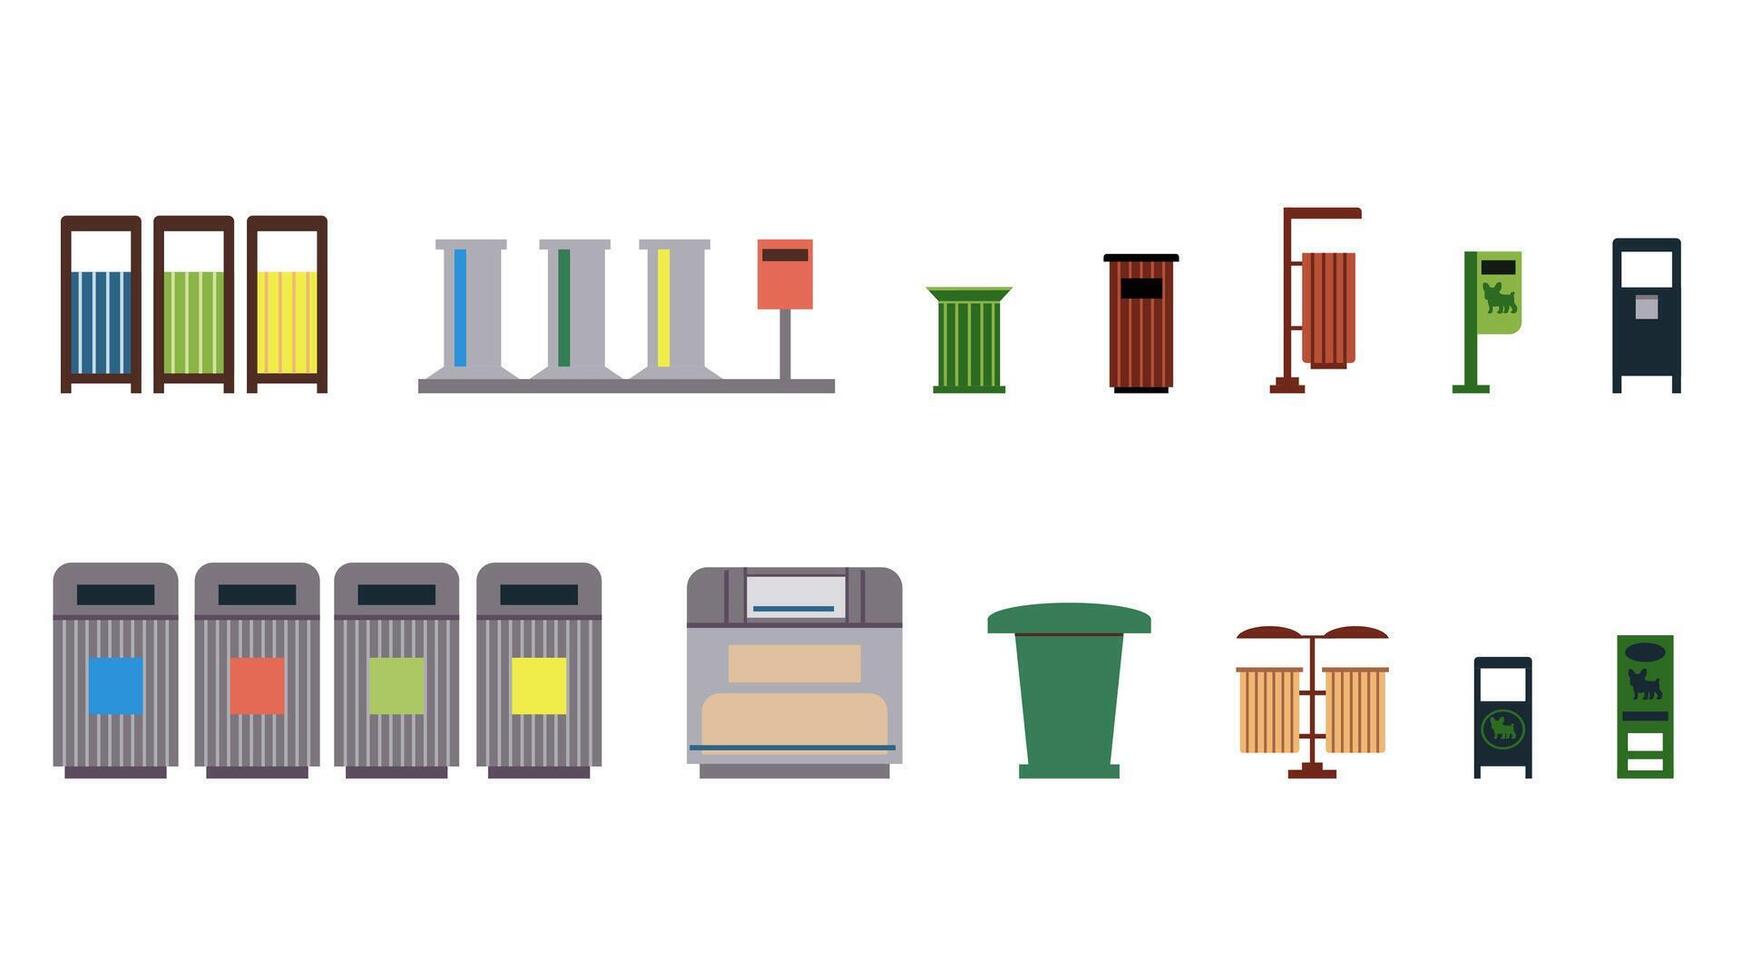 Collection of 16 garbage cans, garbage cans for garbage separation, park bins, containers for dog waste. Elements of urban infrastructure and urban park, illustrations in a flat style. vector